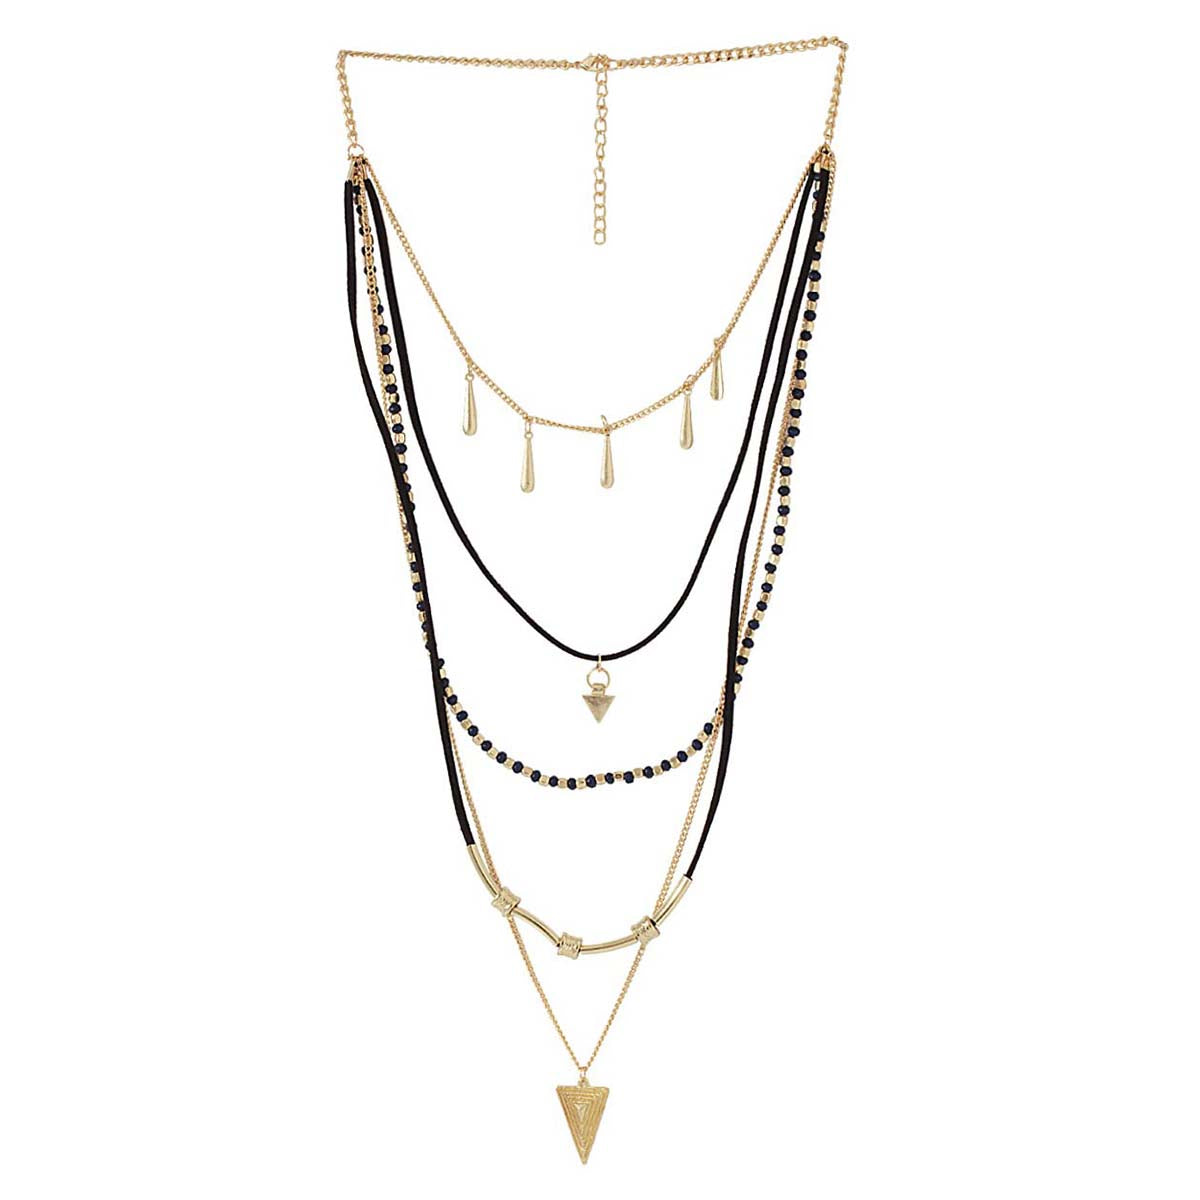 Fascinating Multi-Layered Necklace Adorned With Black And Golden Beads